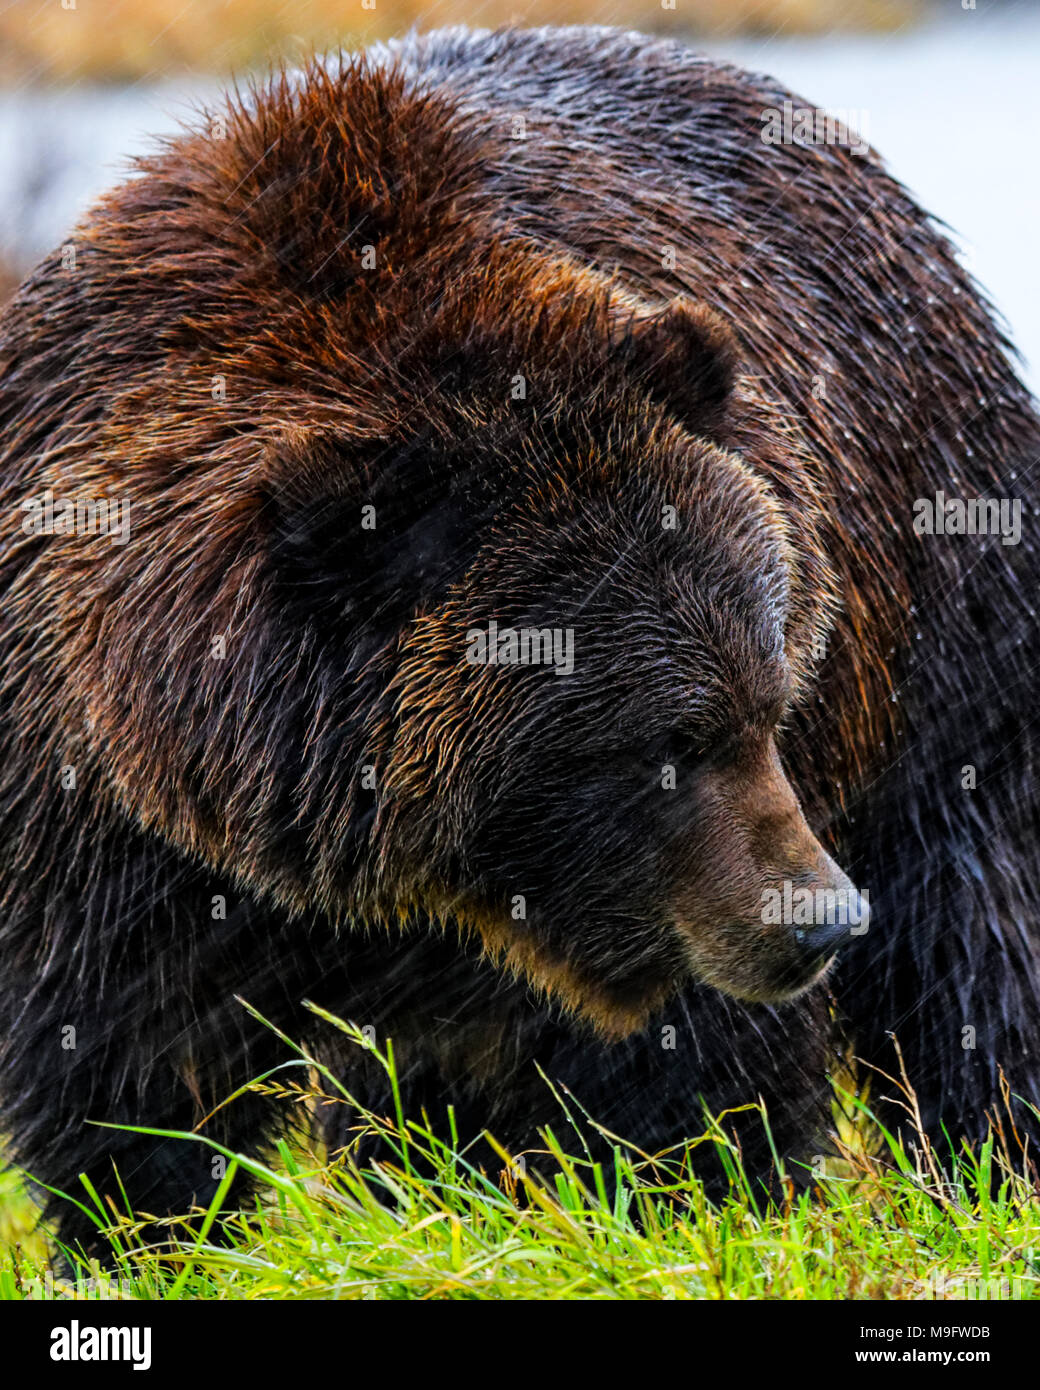 41,571.00282 close-up of an adult Grizzly bear in the rain on a grassy stream bank Stock Photo